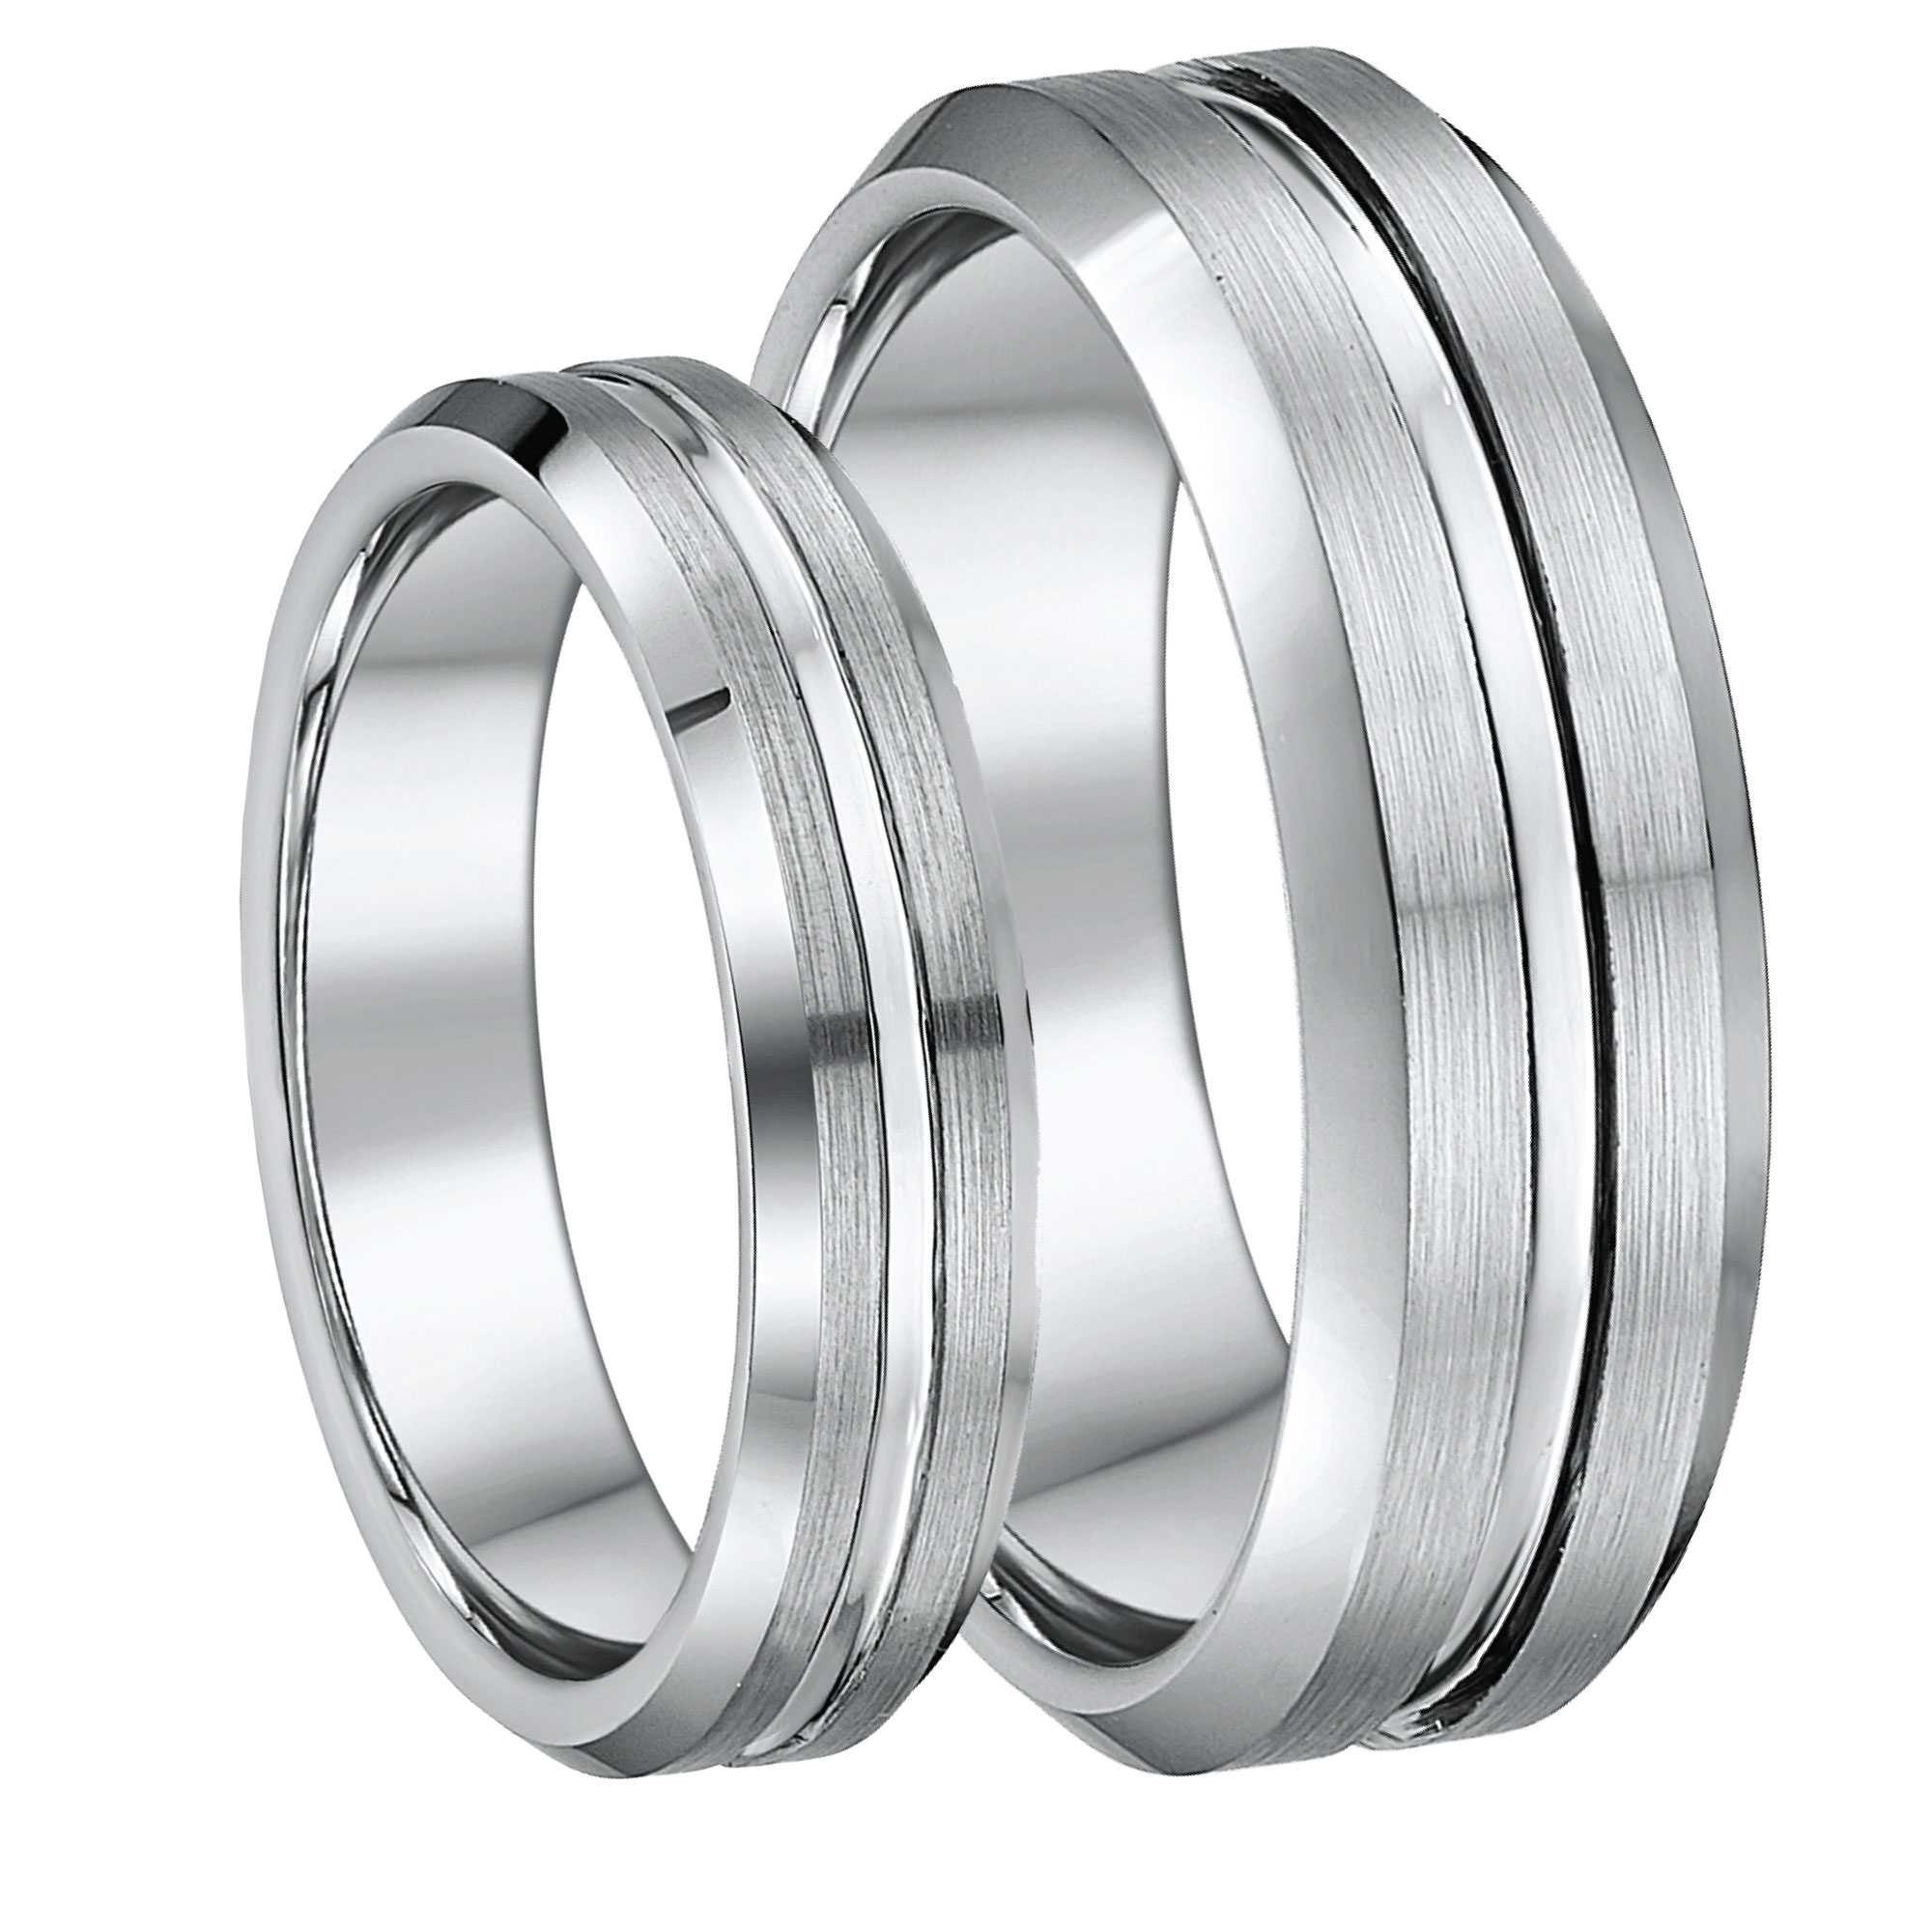 The most effective method to Choose a Tungsten Wedding Ring